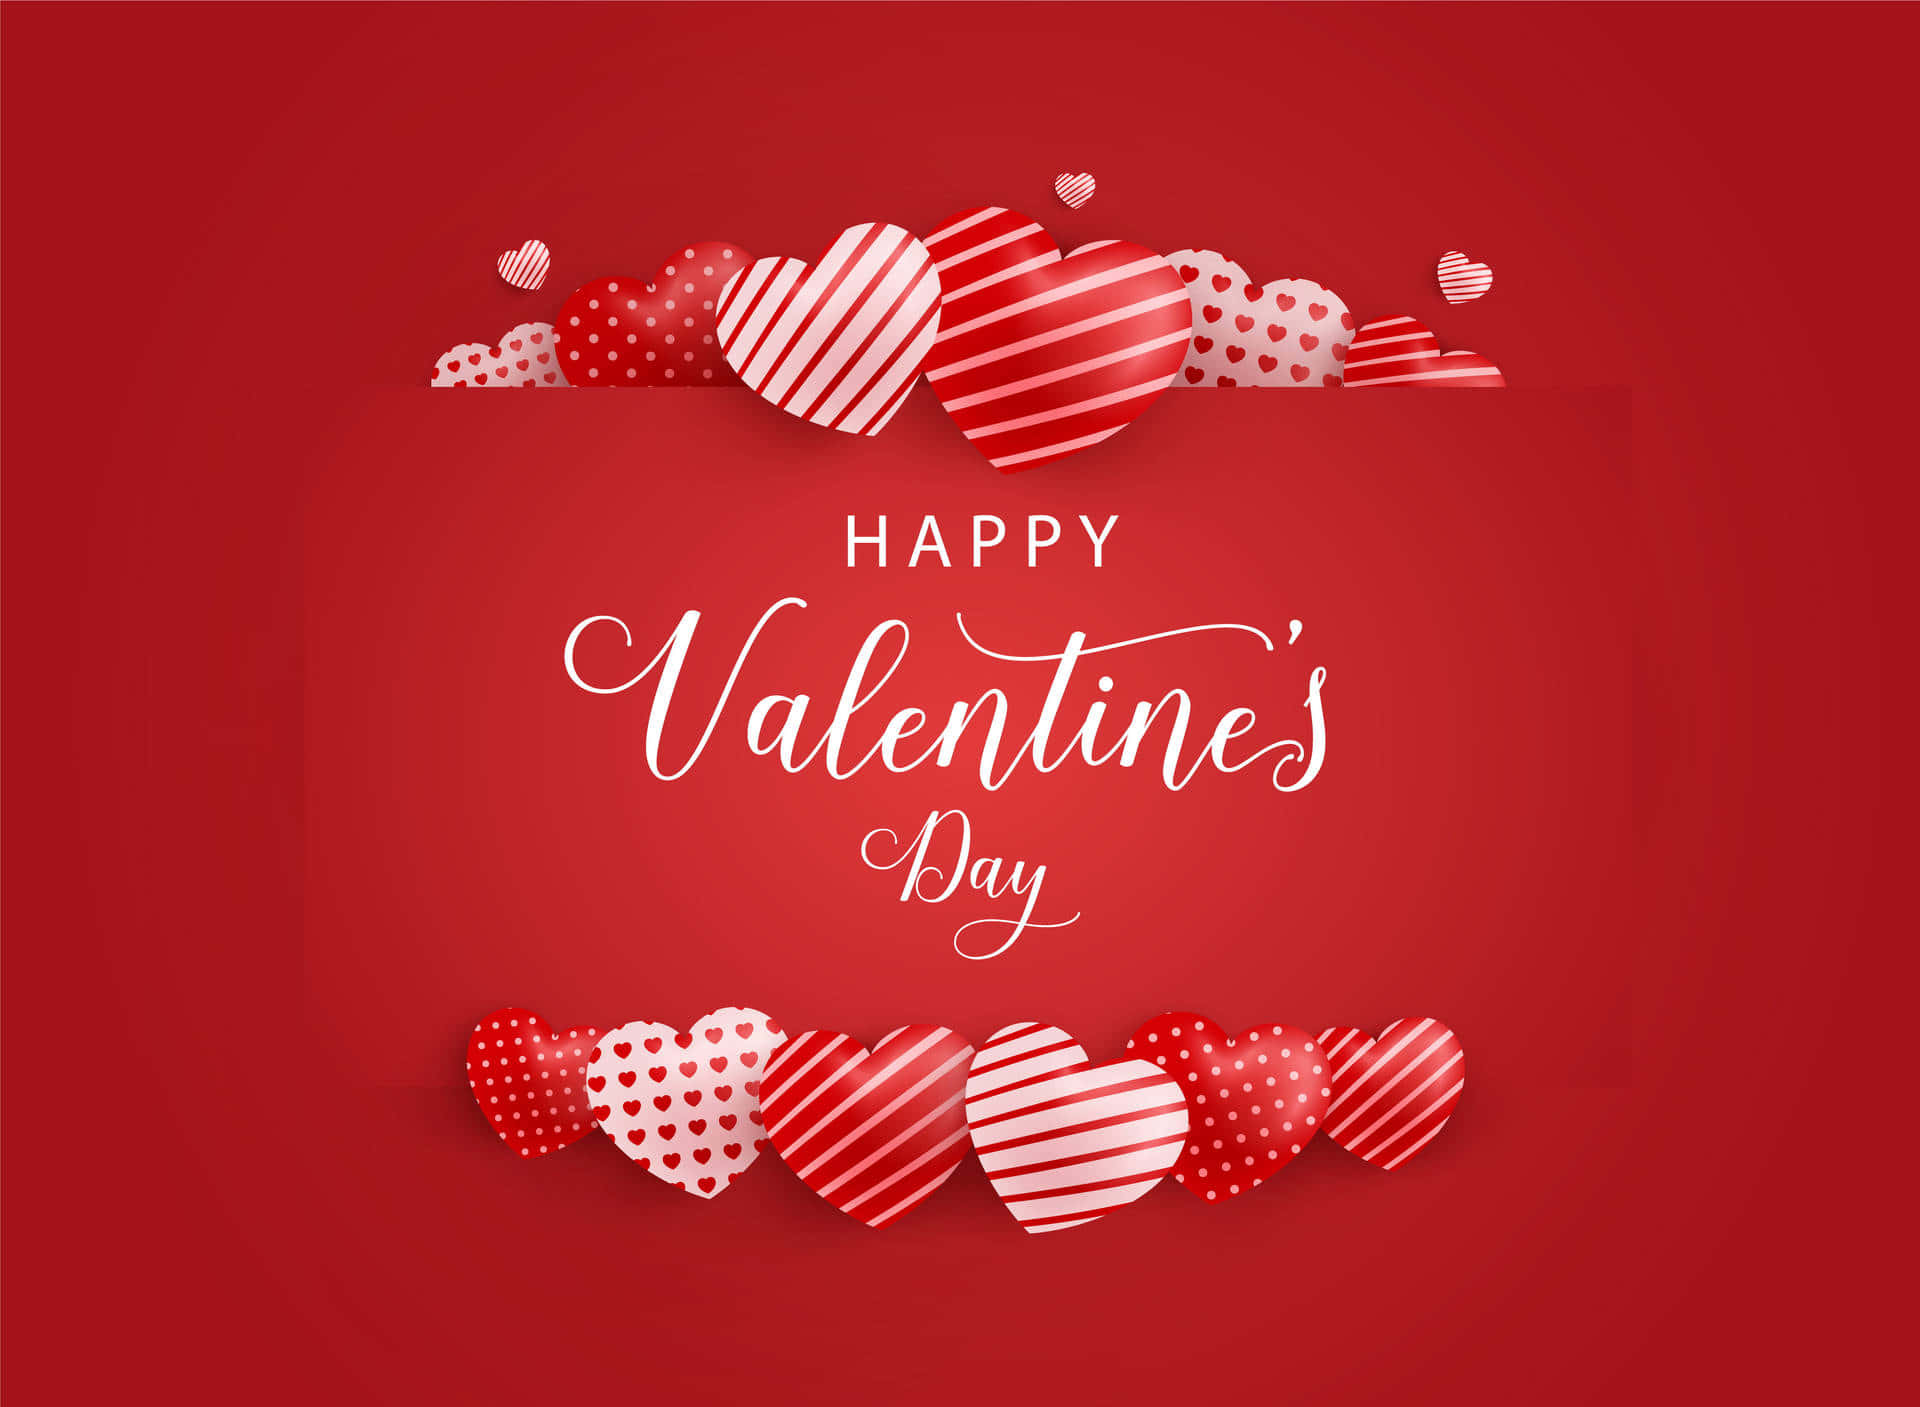 Caption: Celebrate Love with a Happy Valentine's Day Background